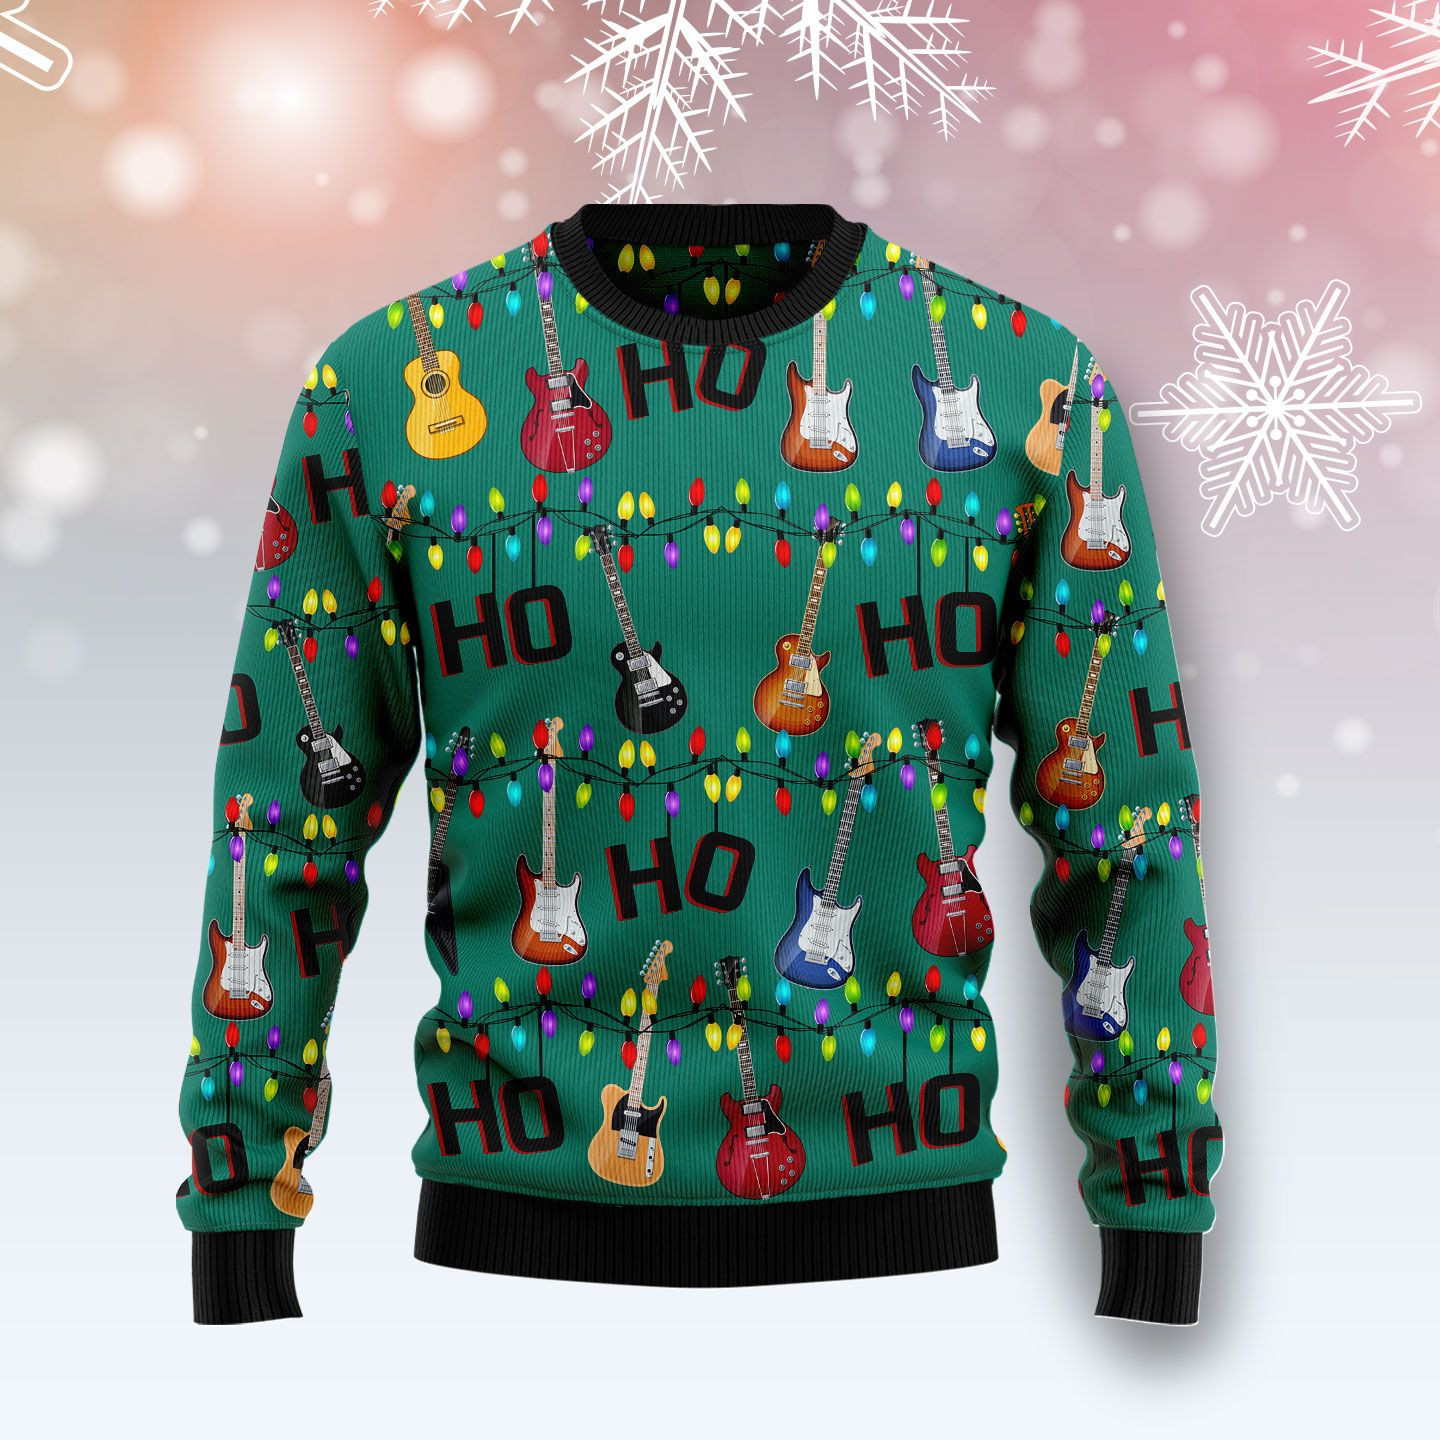 Electric Guitar Hohoho Ugly Christmas Sweater Ugly Sweater For Men Women